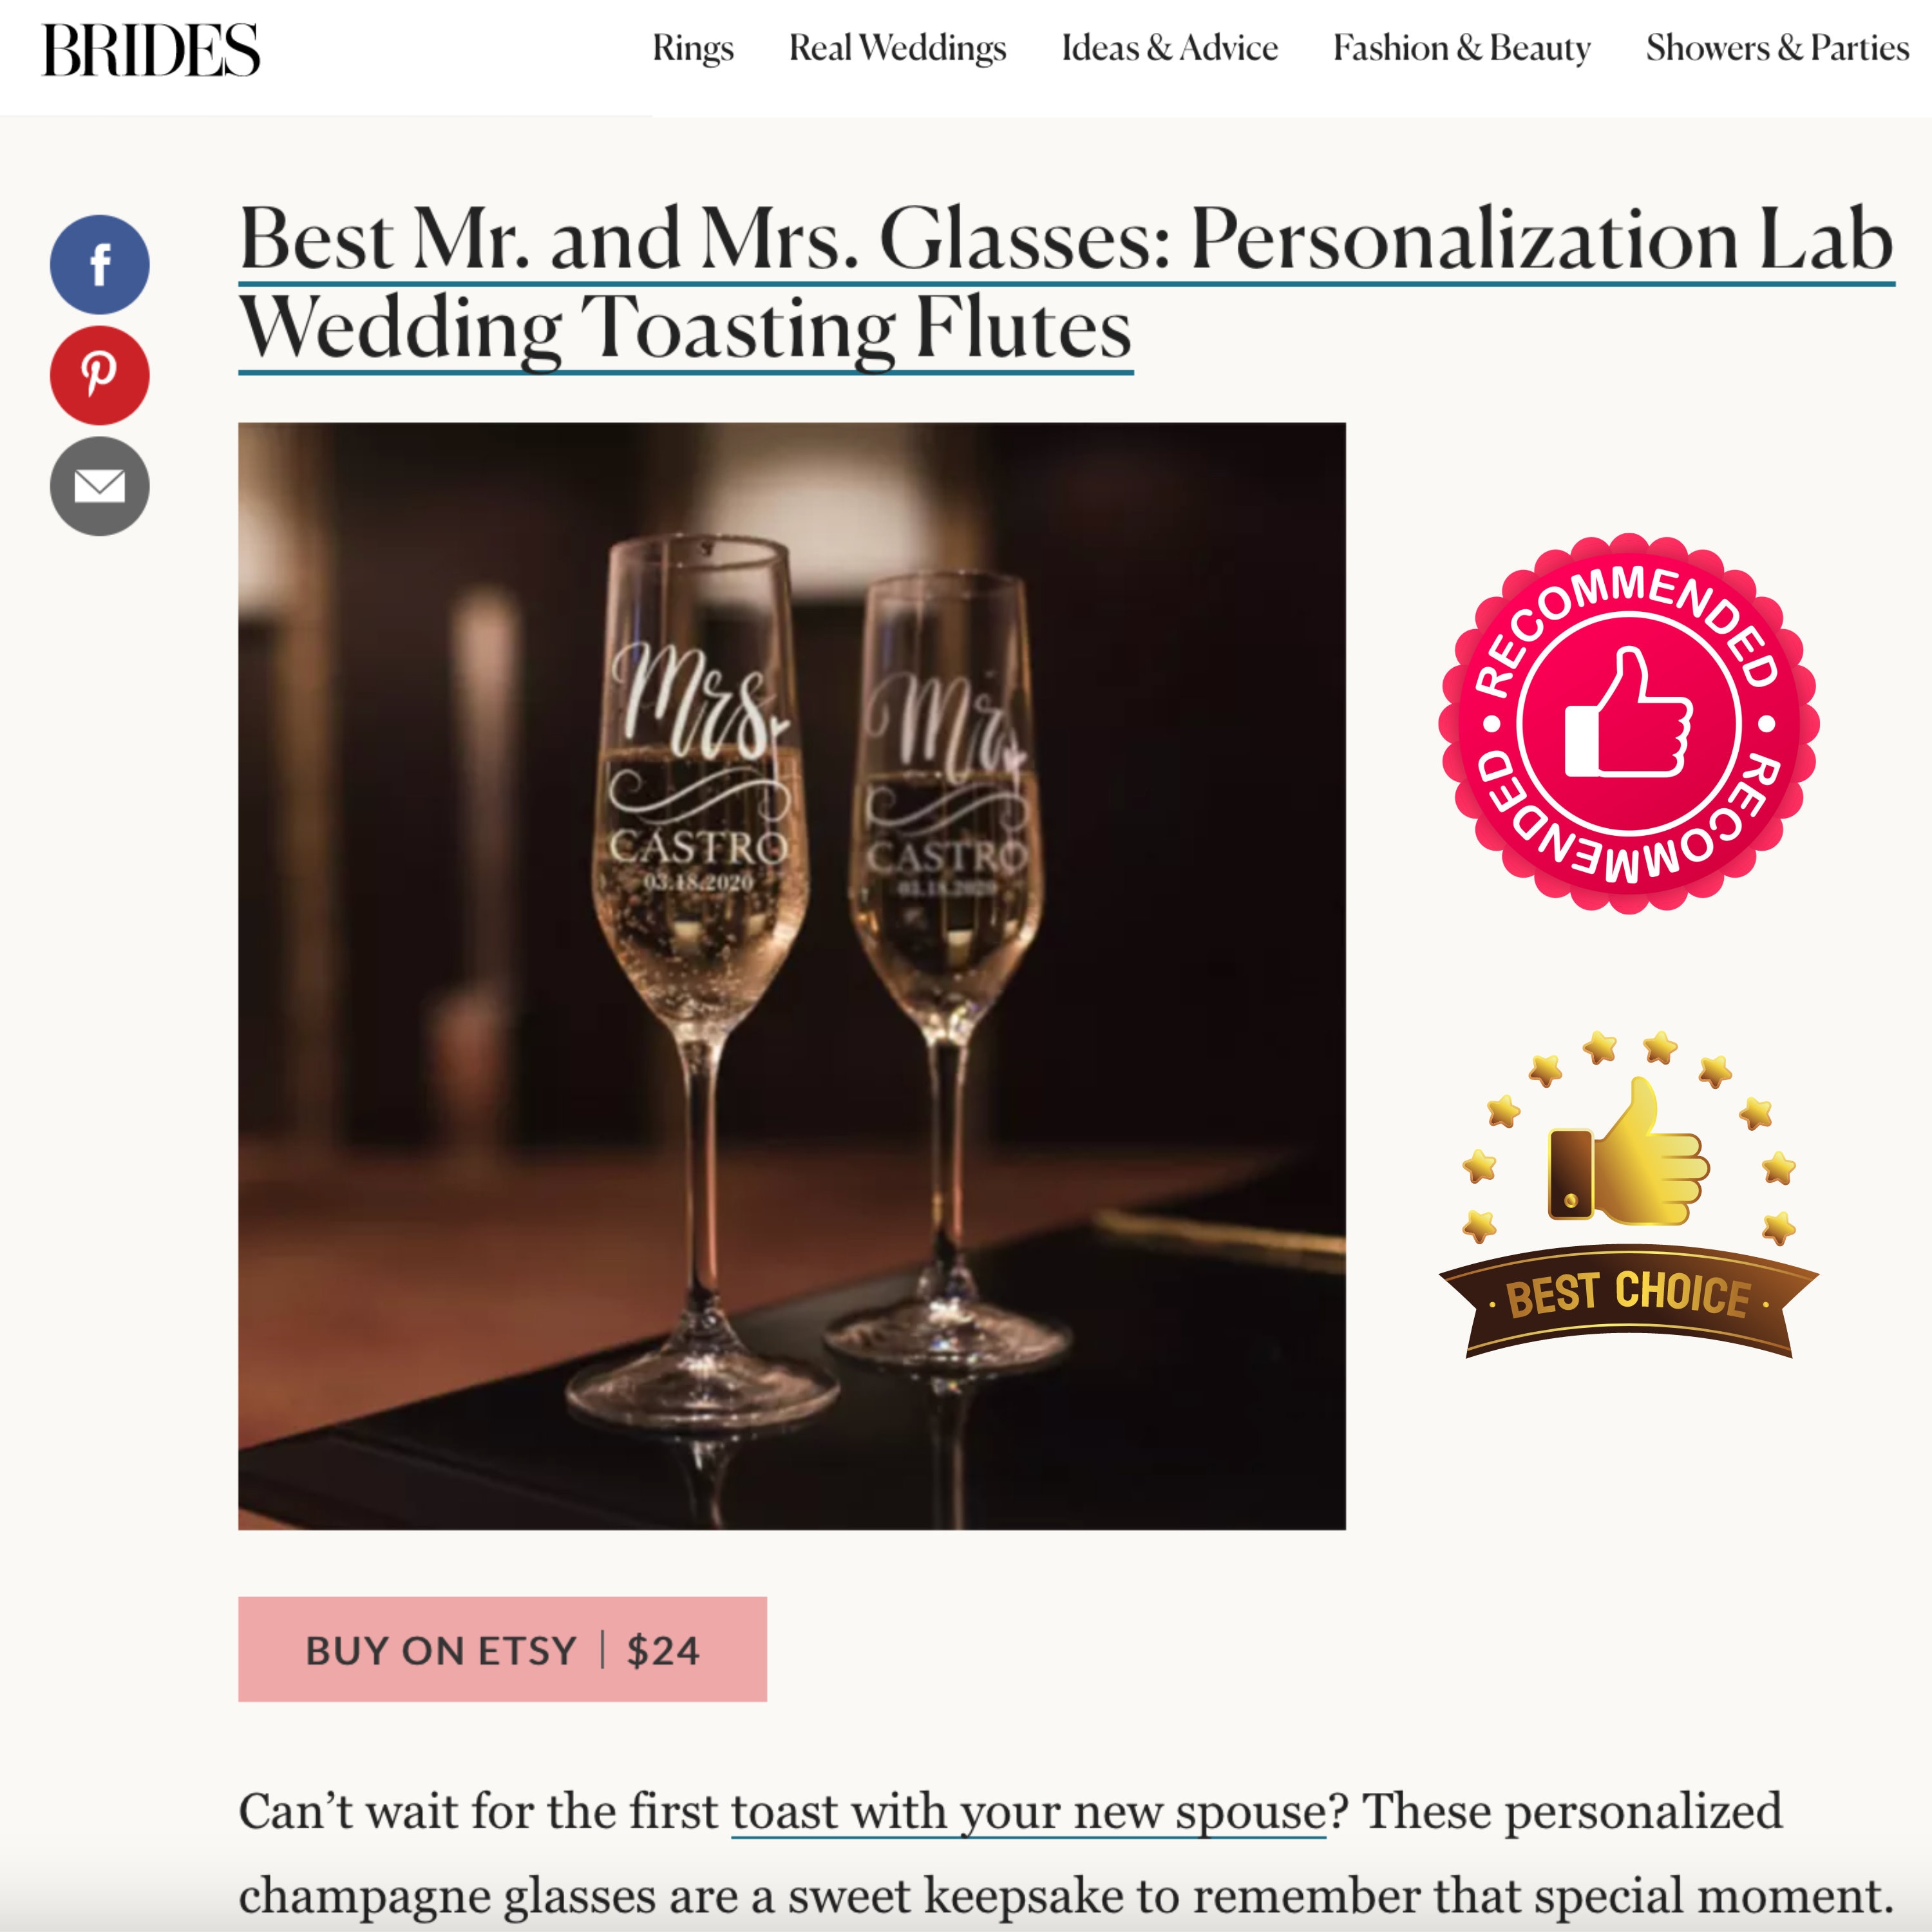 Personalized Wedding Toast Champagne Flute Set Wedding Toasting Glasses Etched Flutes for Bride & Groom Customized Wedding Gift #N9 Bride Groom Names & Date Hearts P Lab Set of 2 